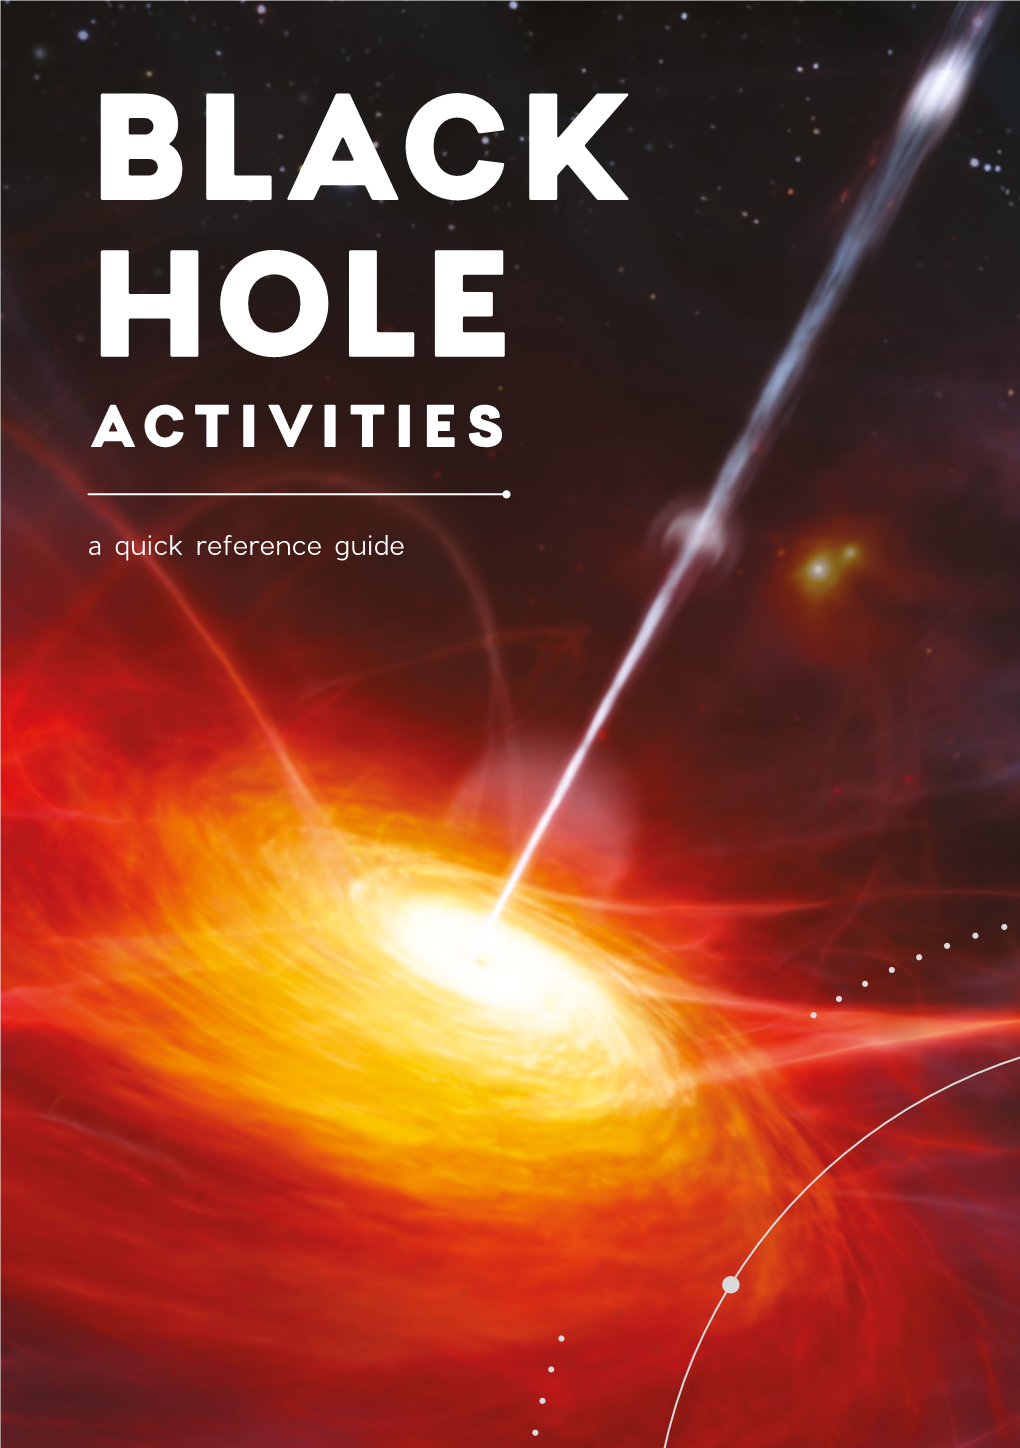 BLACK HOLE ACTIVITIES a Quick Reference Guide INTRO